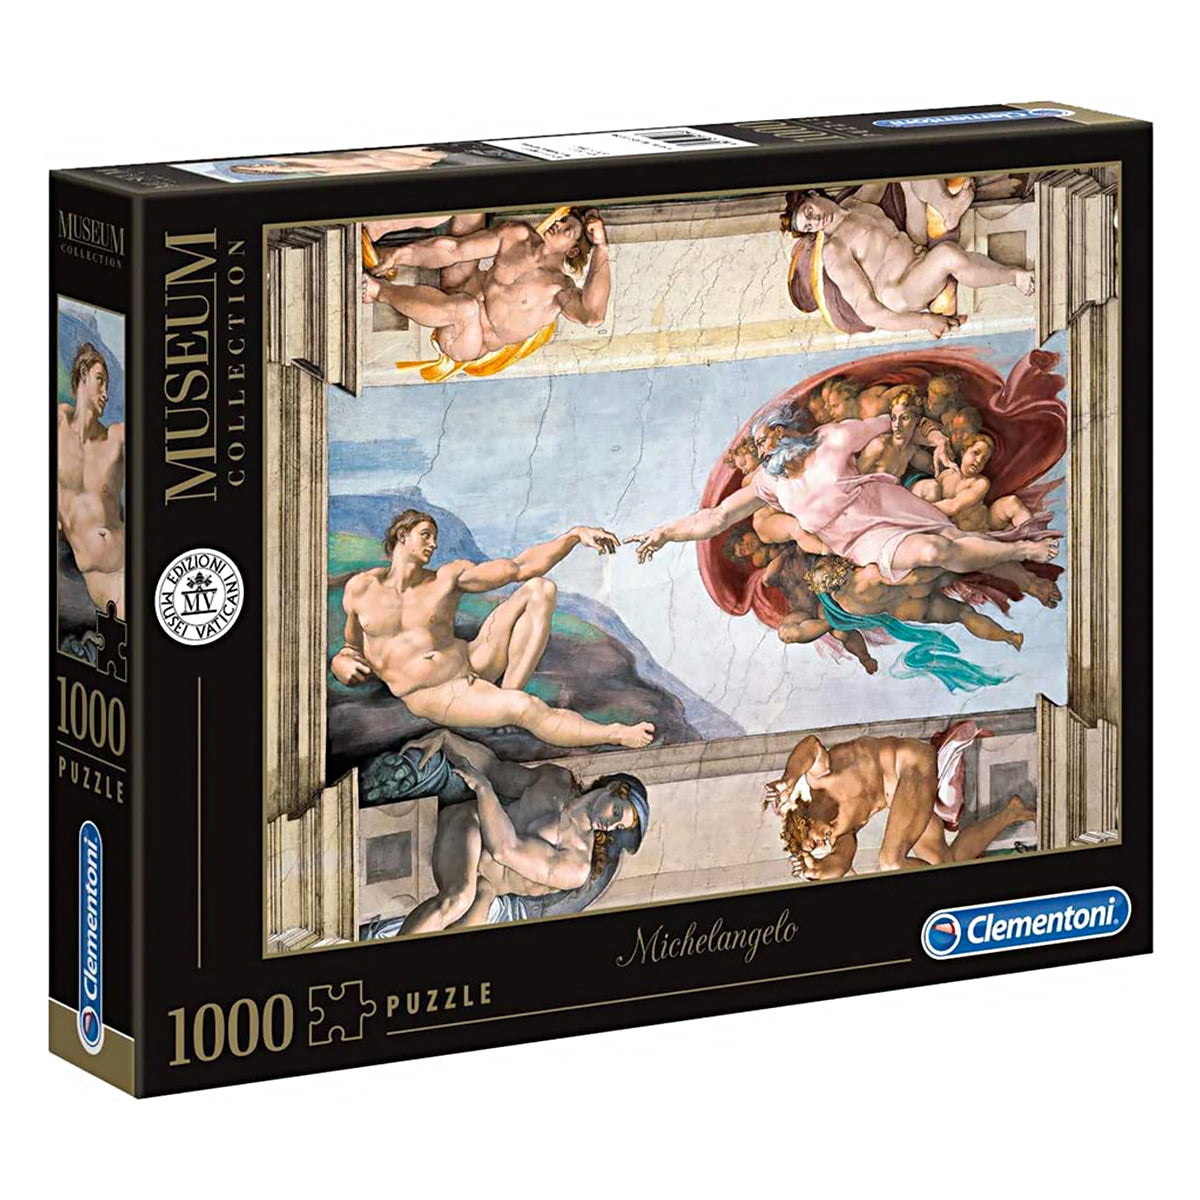 Clementoni's Museum Collection featuring Michelangelo's painting 'The Creation of Adam'.